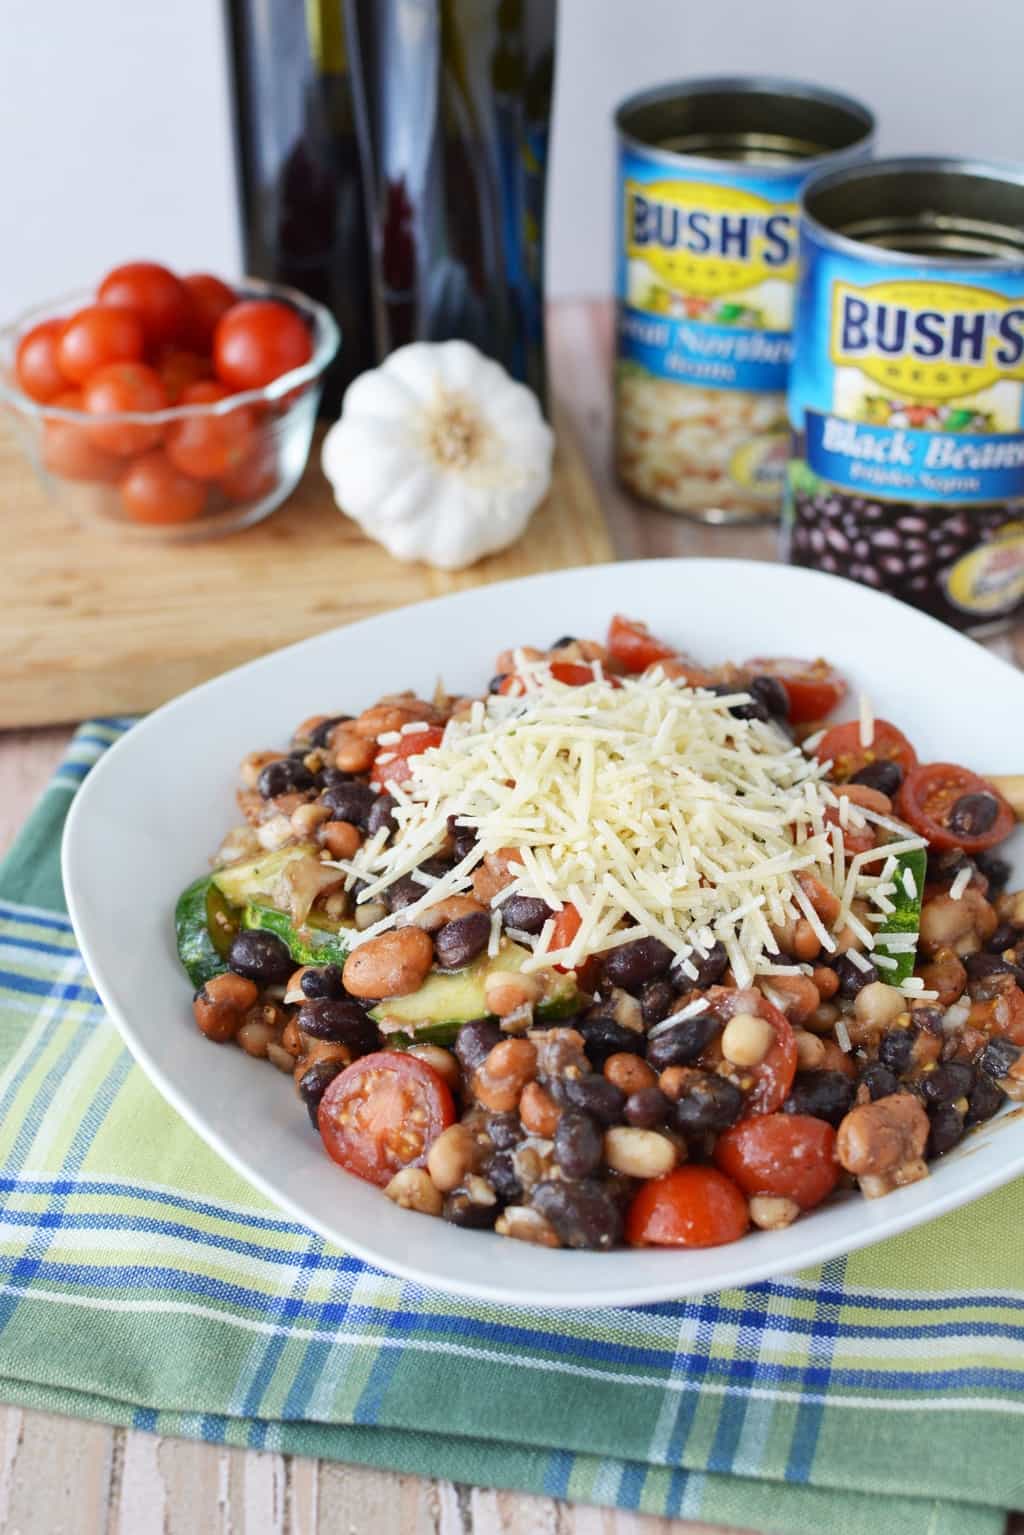 Are you planning a game day or super bowl party? This Easy Cold Bean Salad has the taste of 'mush' beans along with the crunch of an onion and a cucumber.  It also has a balsamic-y taste because of the vinegar, but it's not too strong.